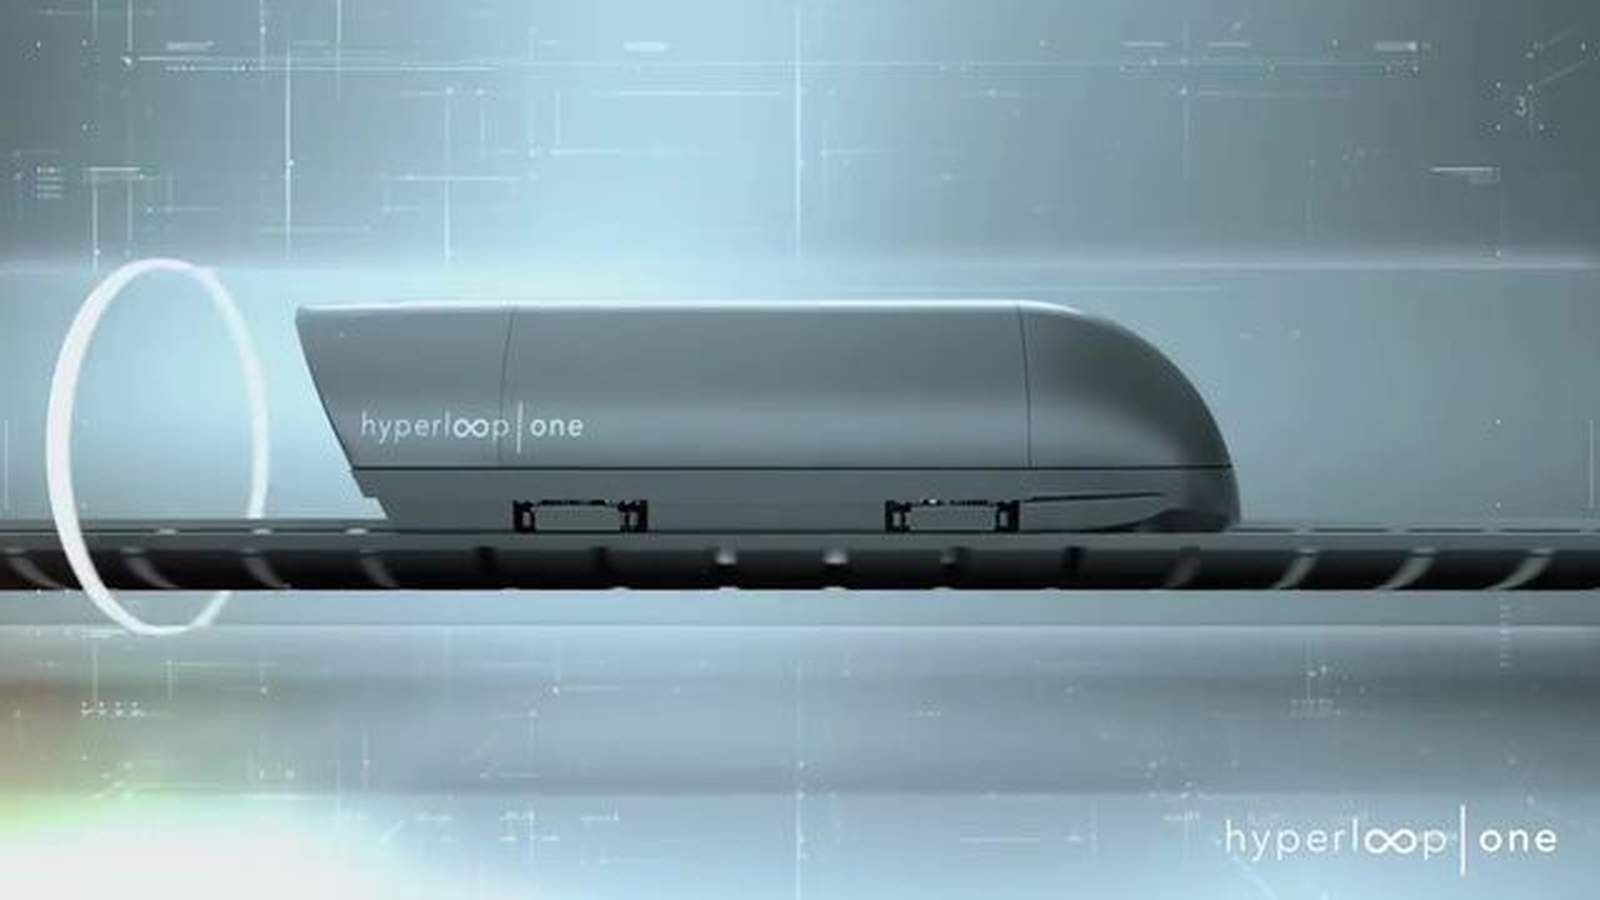 Hyperloop Technology: When is it coming to Texas?